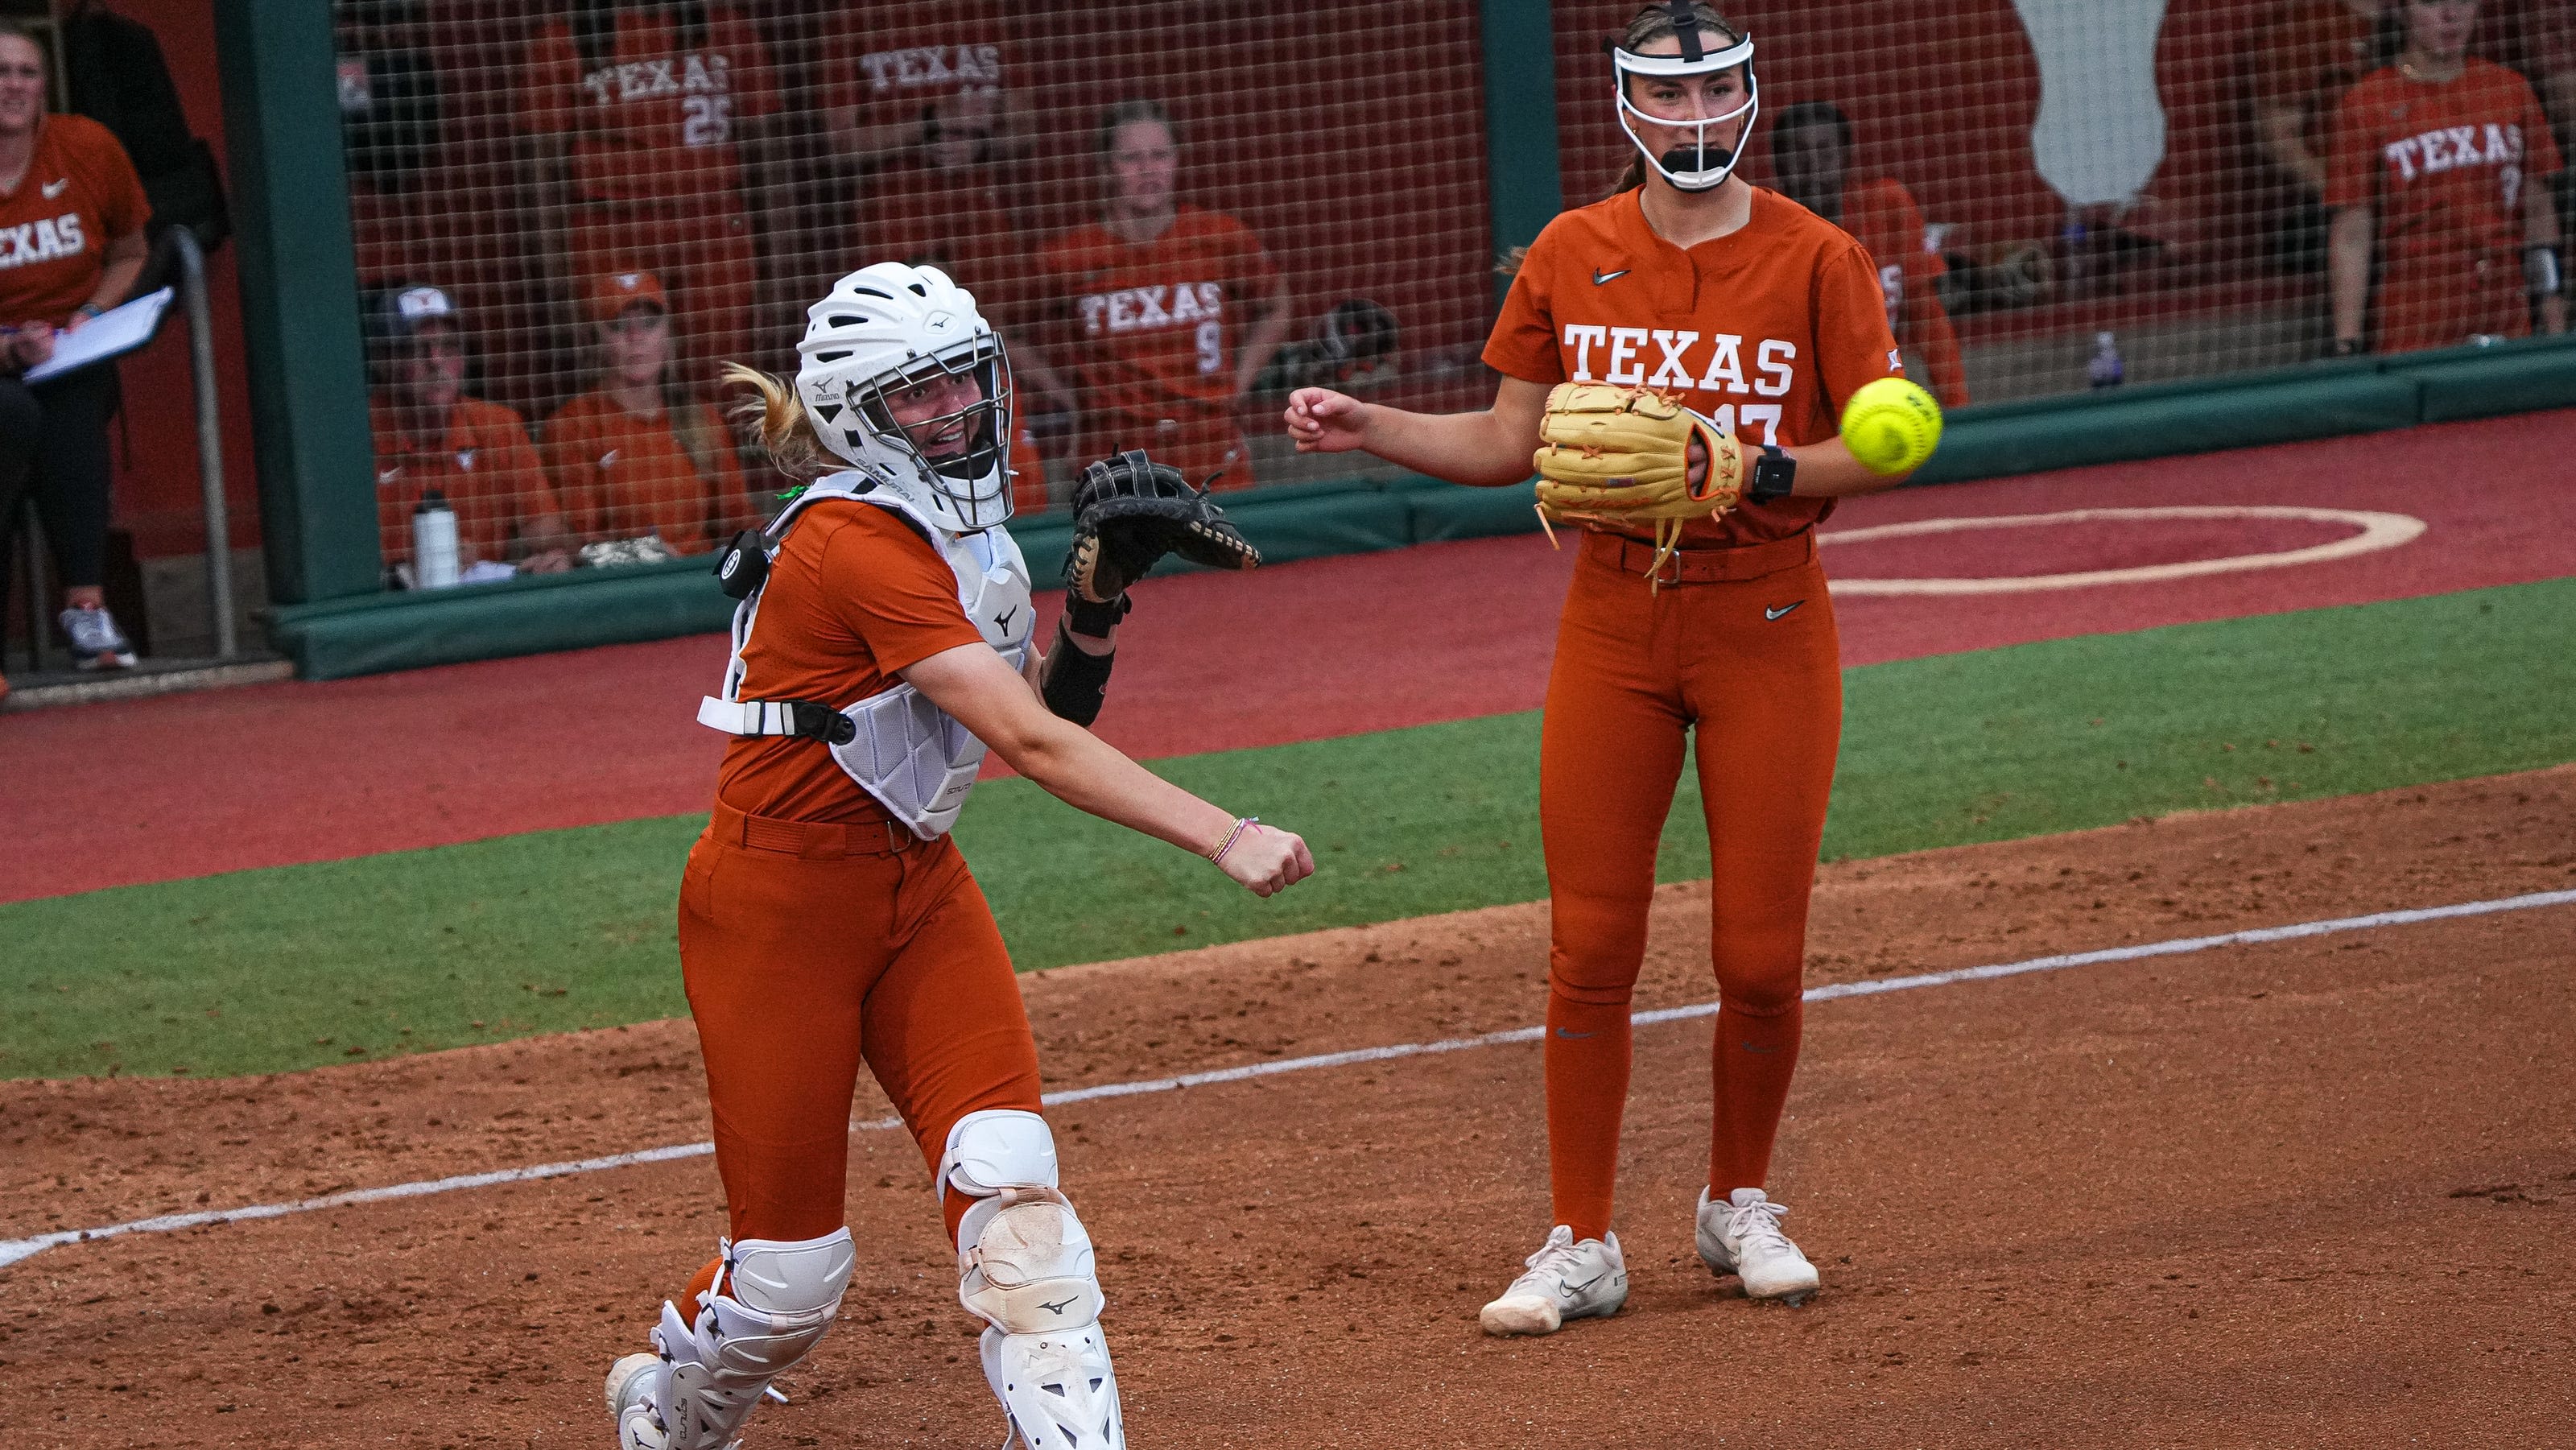 Texas softball catcher Reese Atwood selected as finalist for USA Softball's player of the year